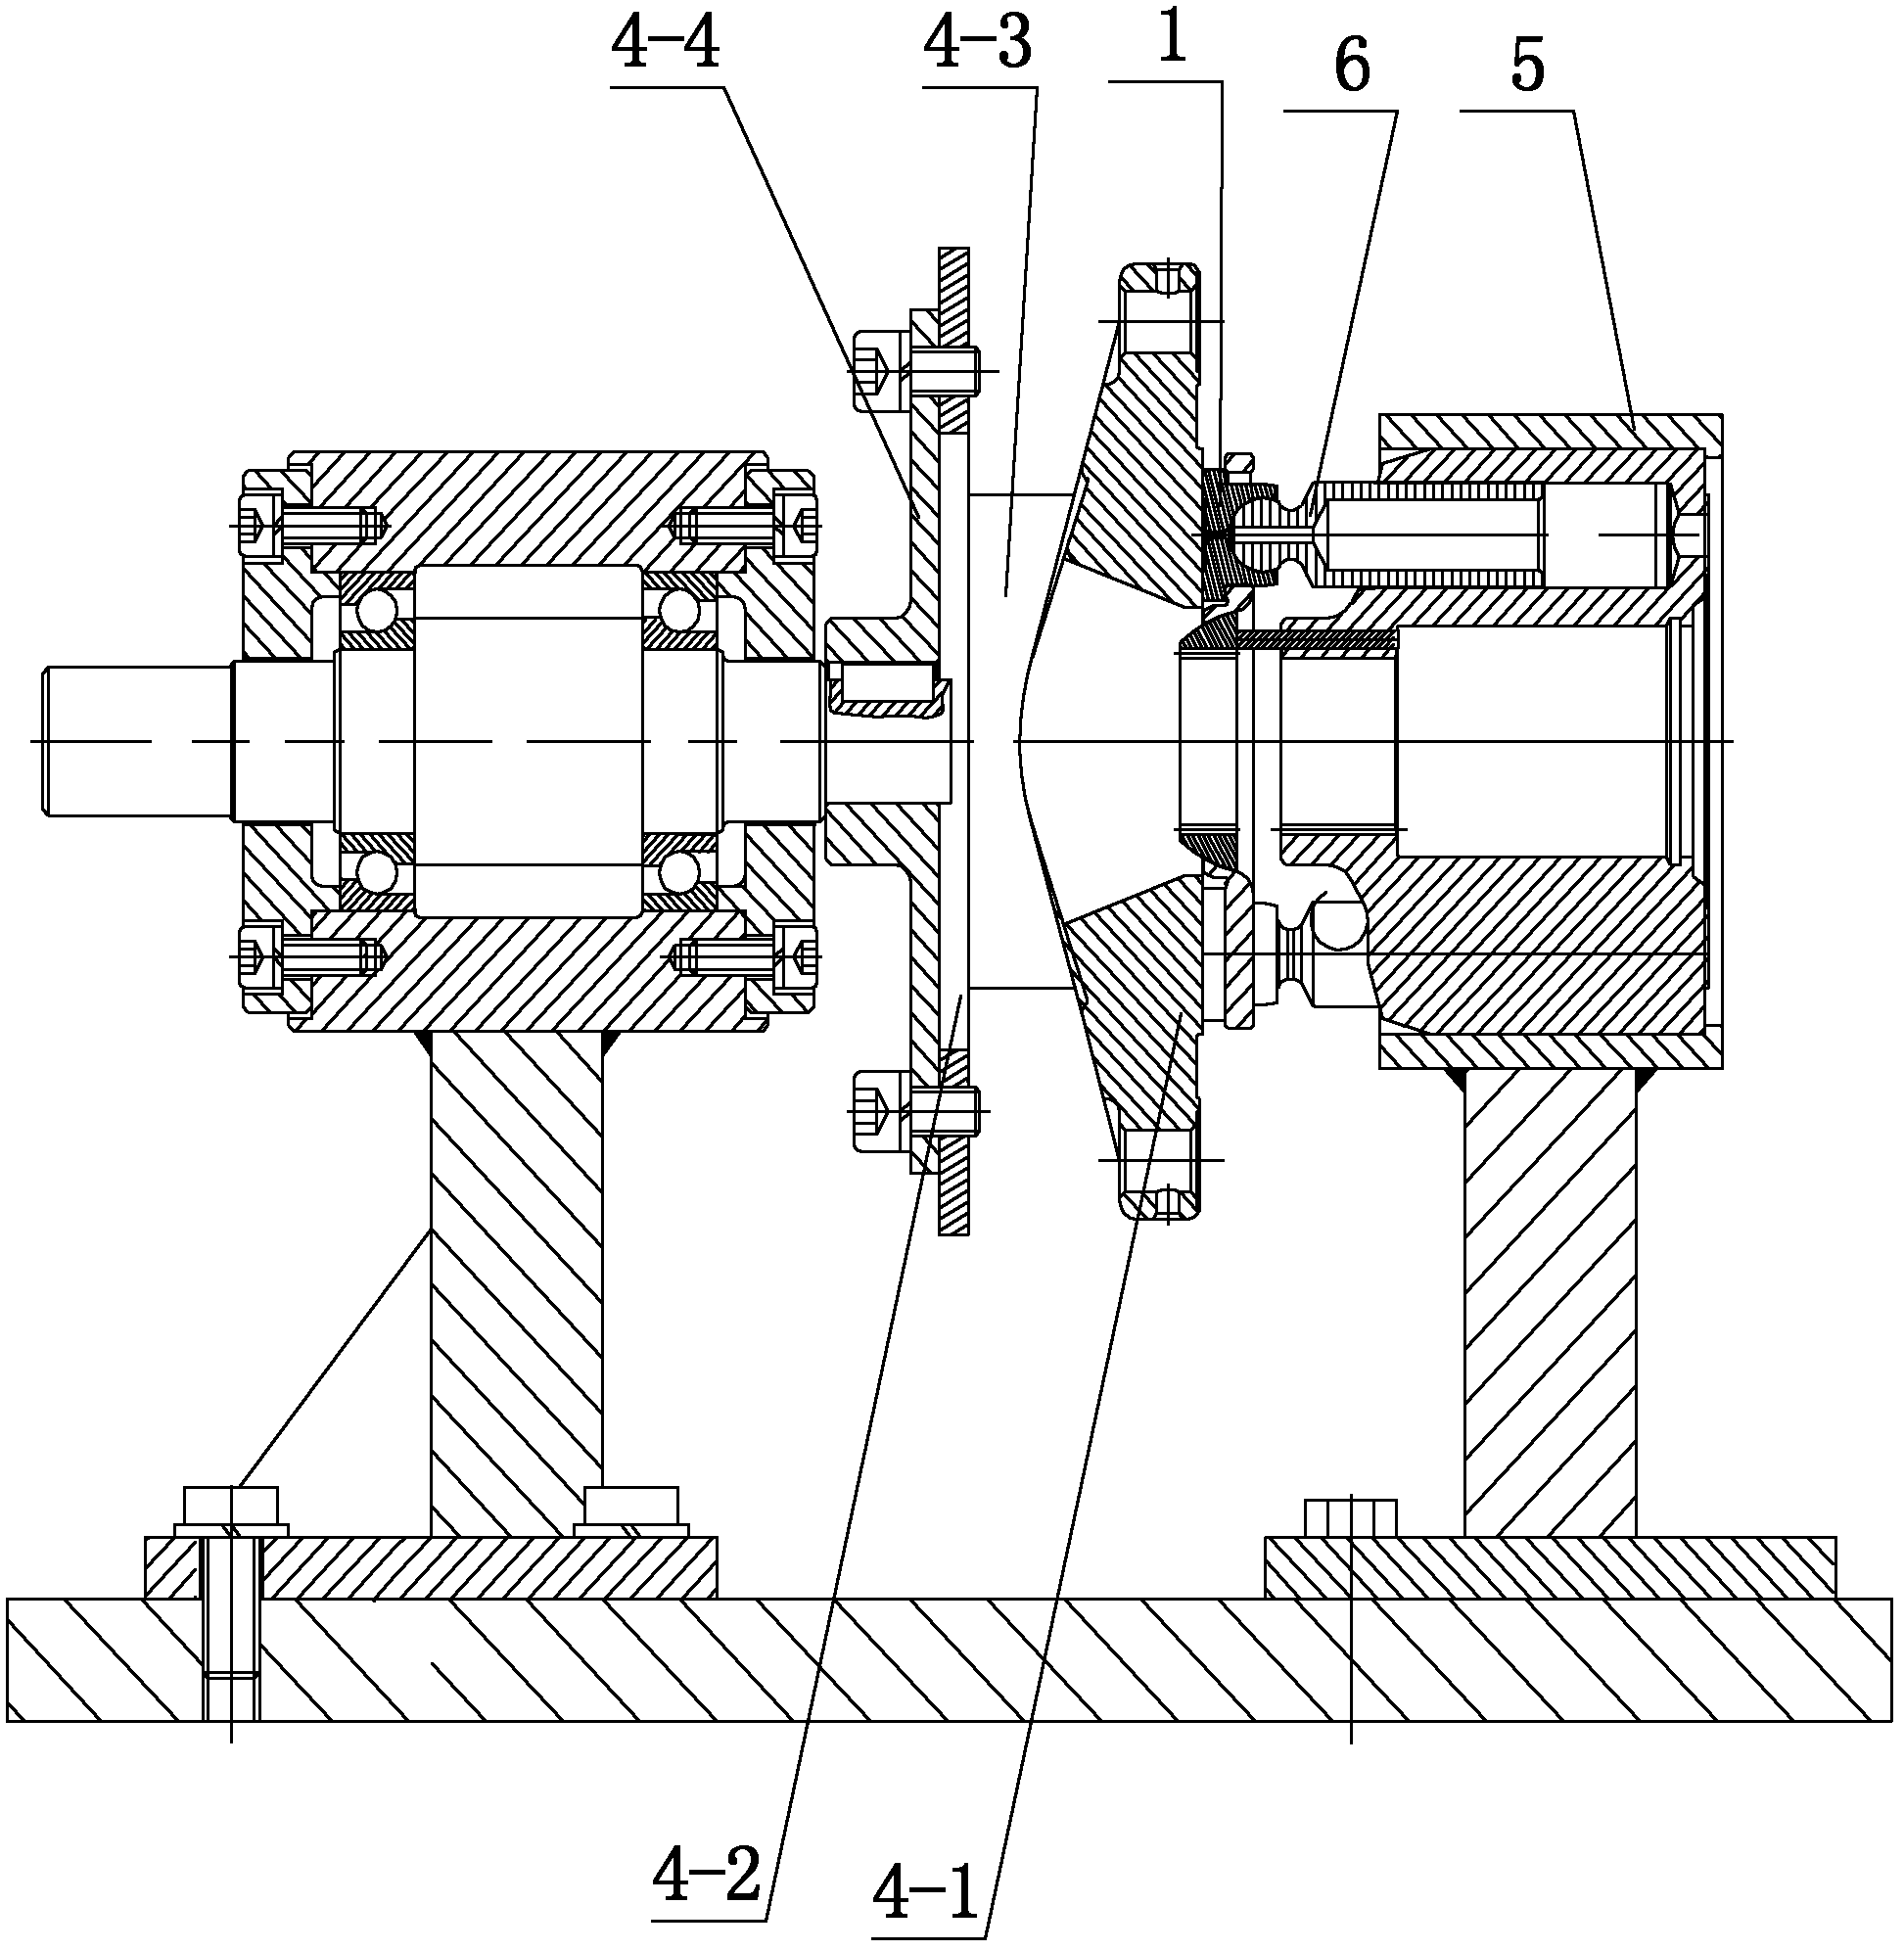 Performance testing device for piston shoe in axial plunger pump